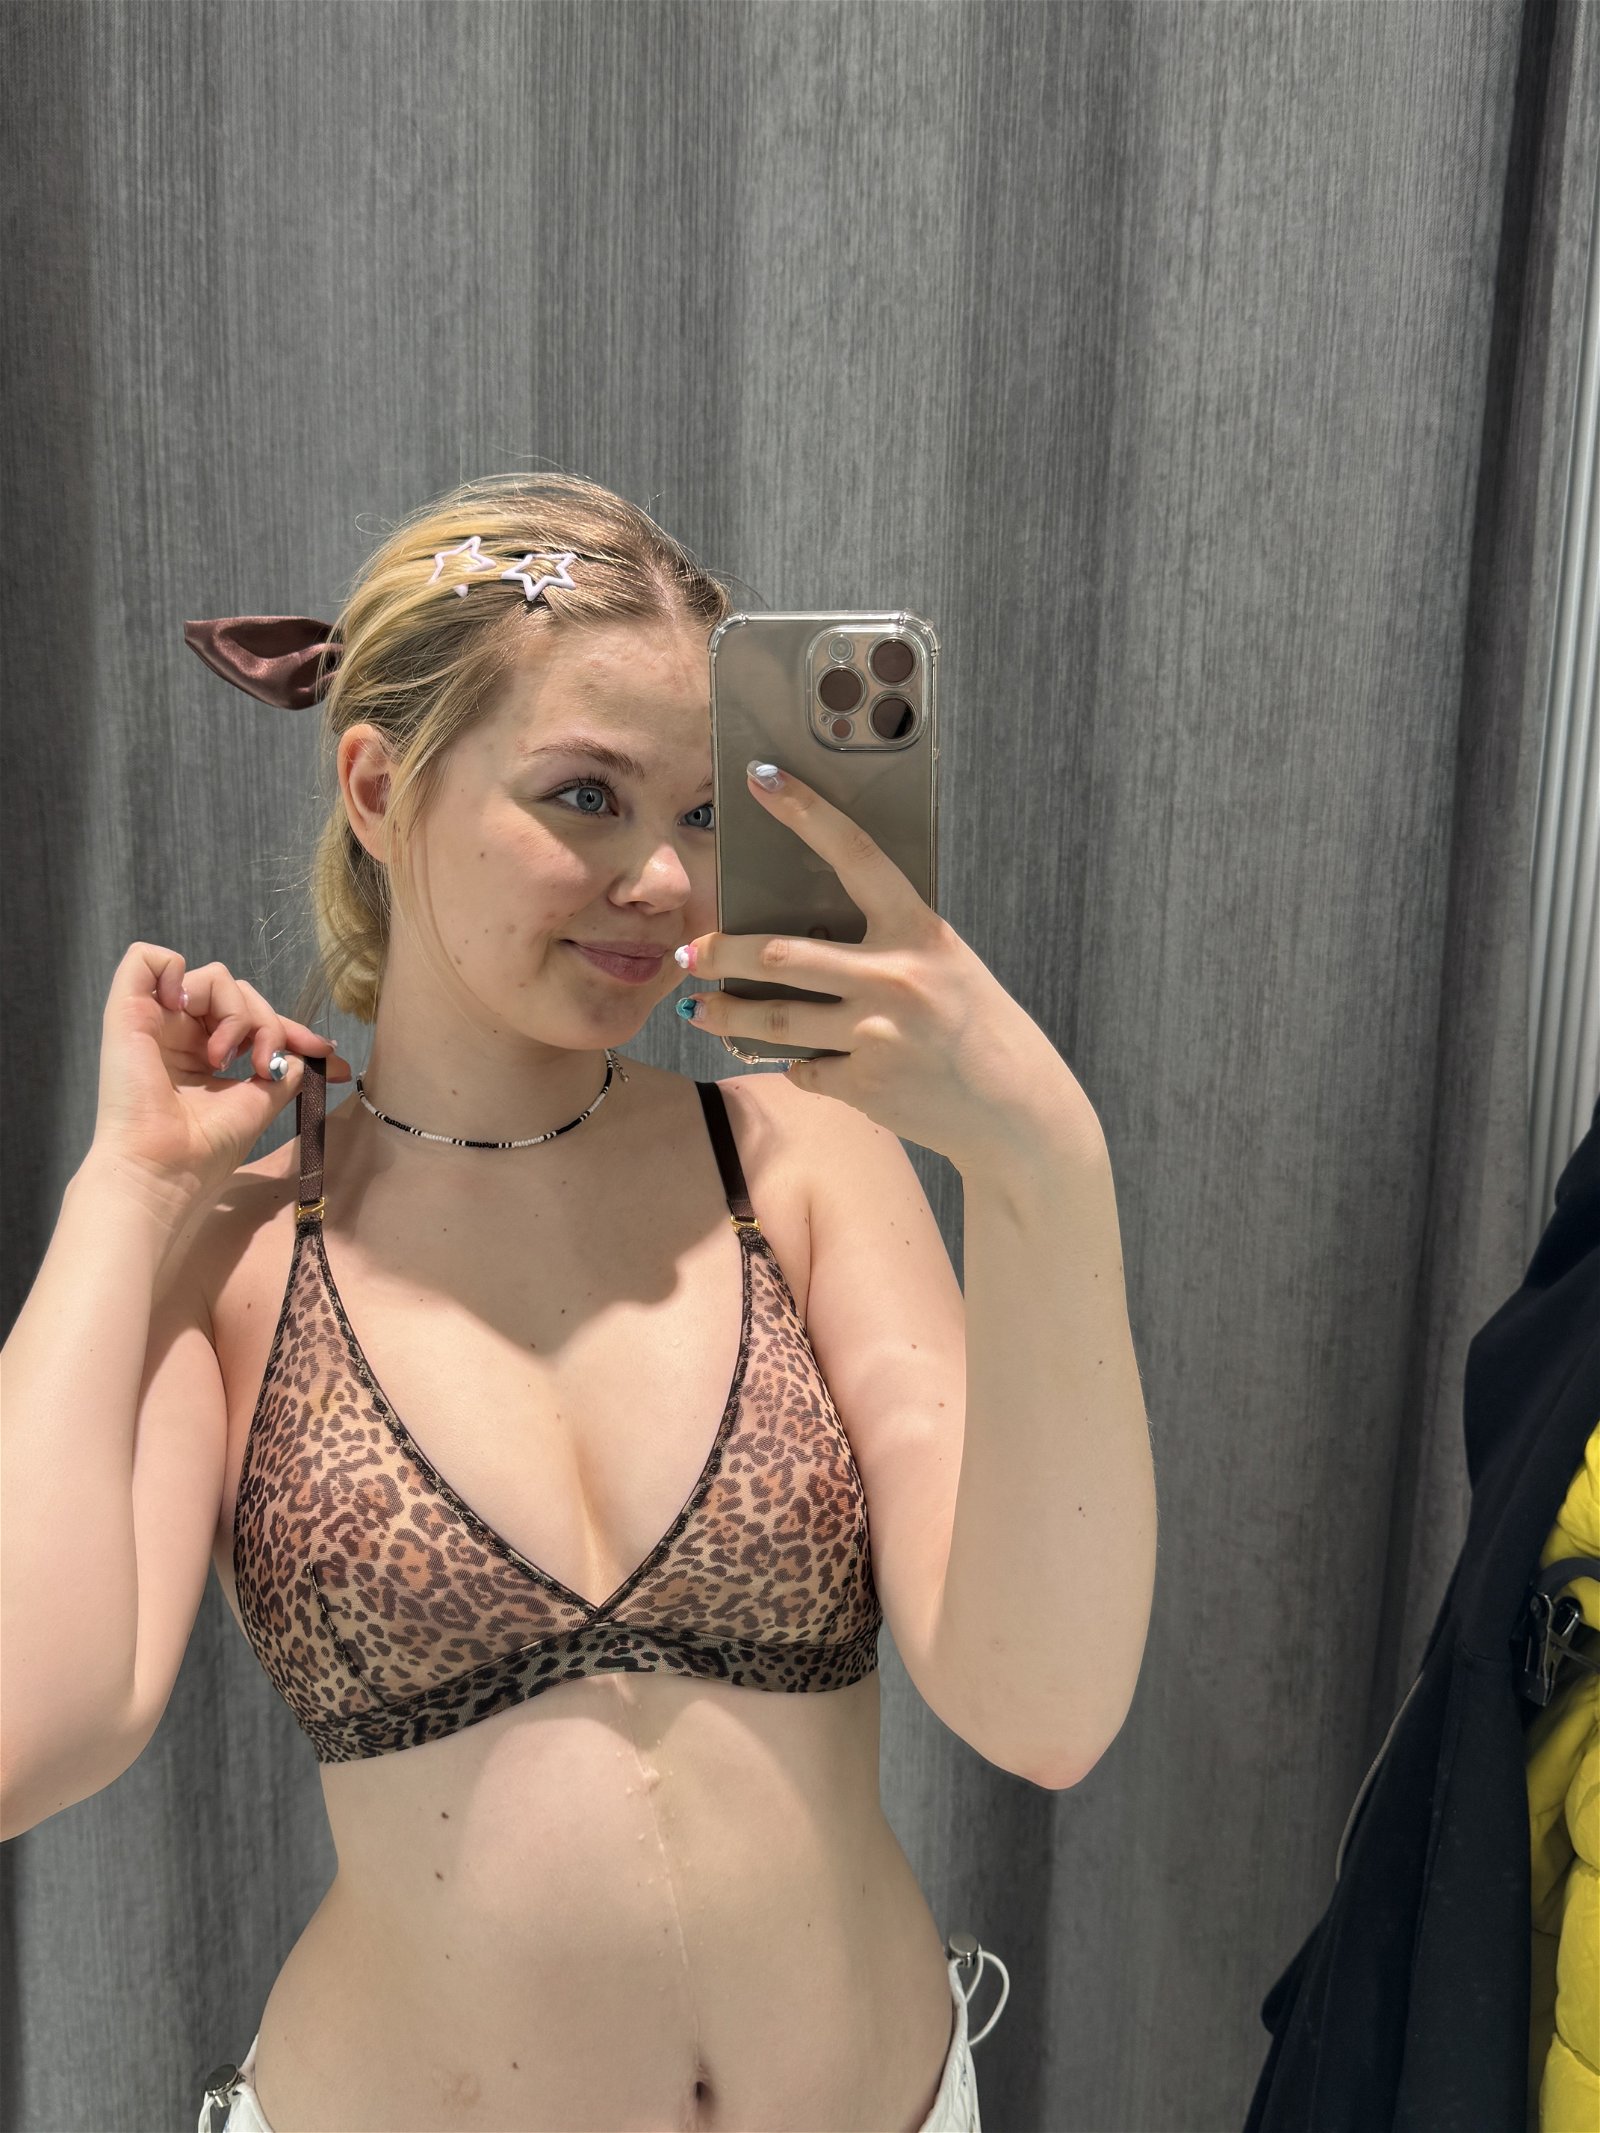 Photo by yummy froggy with the username @Froggy01, who is a star user,  May 14, 2024 at 4:40 AM. The post is about the topic Mirror Selfies and the text says 'which bra is better? 
🔥 - hot leopard 
❤️ - classy black 
⏩ - take them off (click the link)'